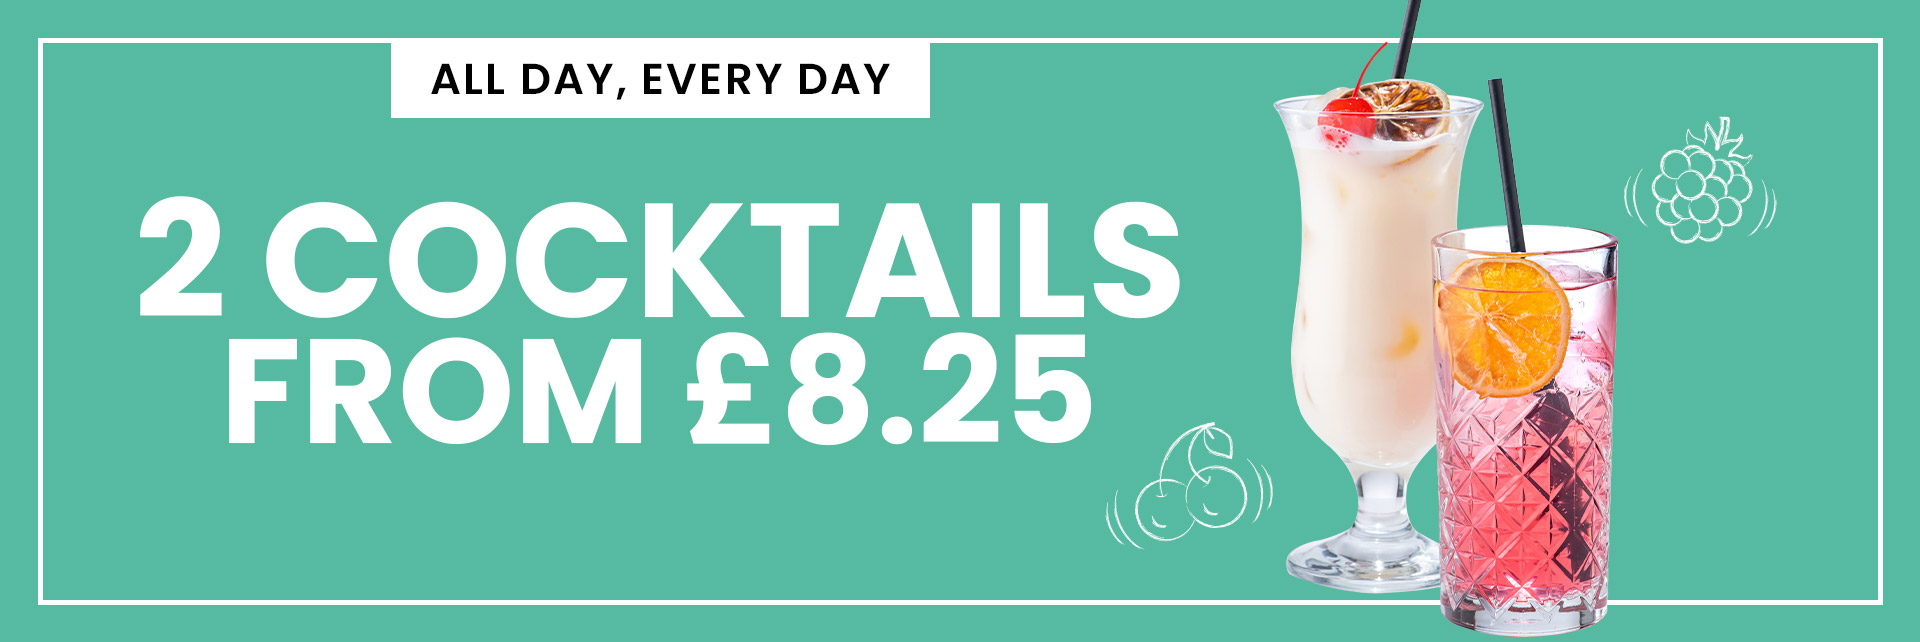 2 cocktails from just £5.50 offer